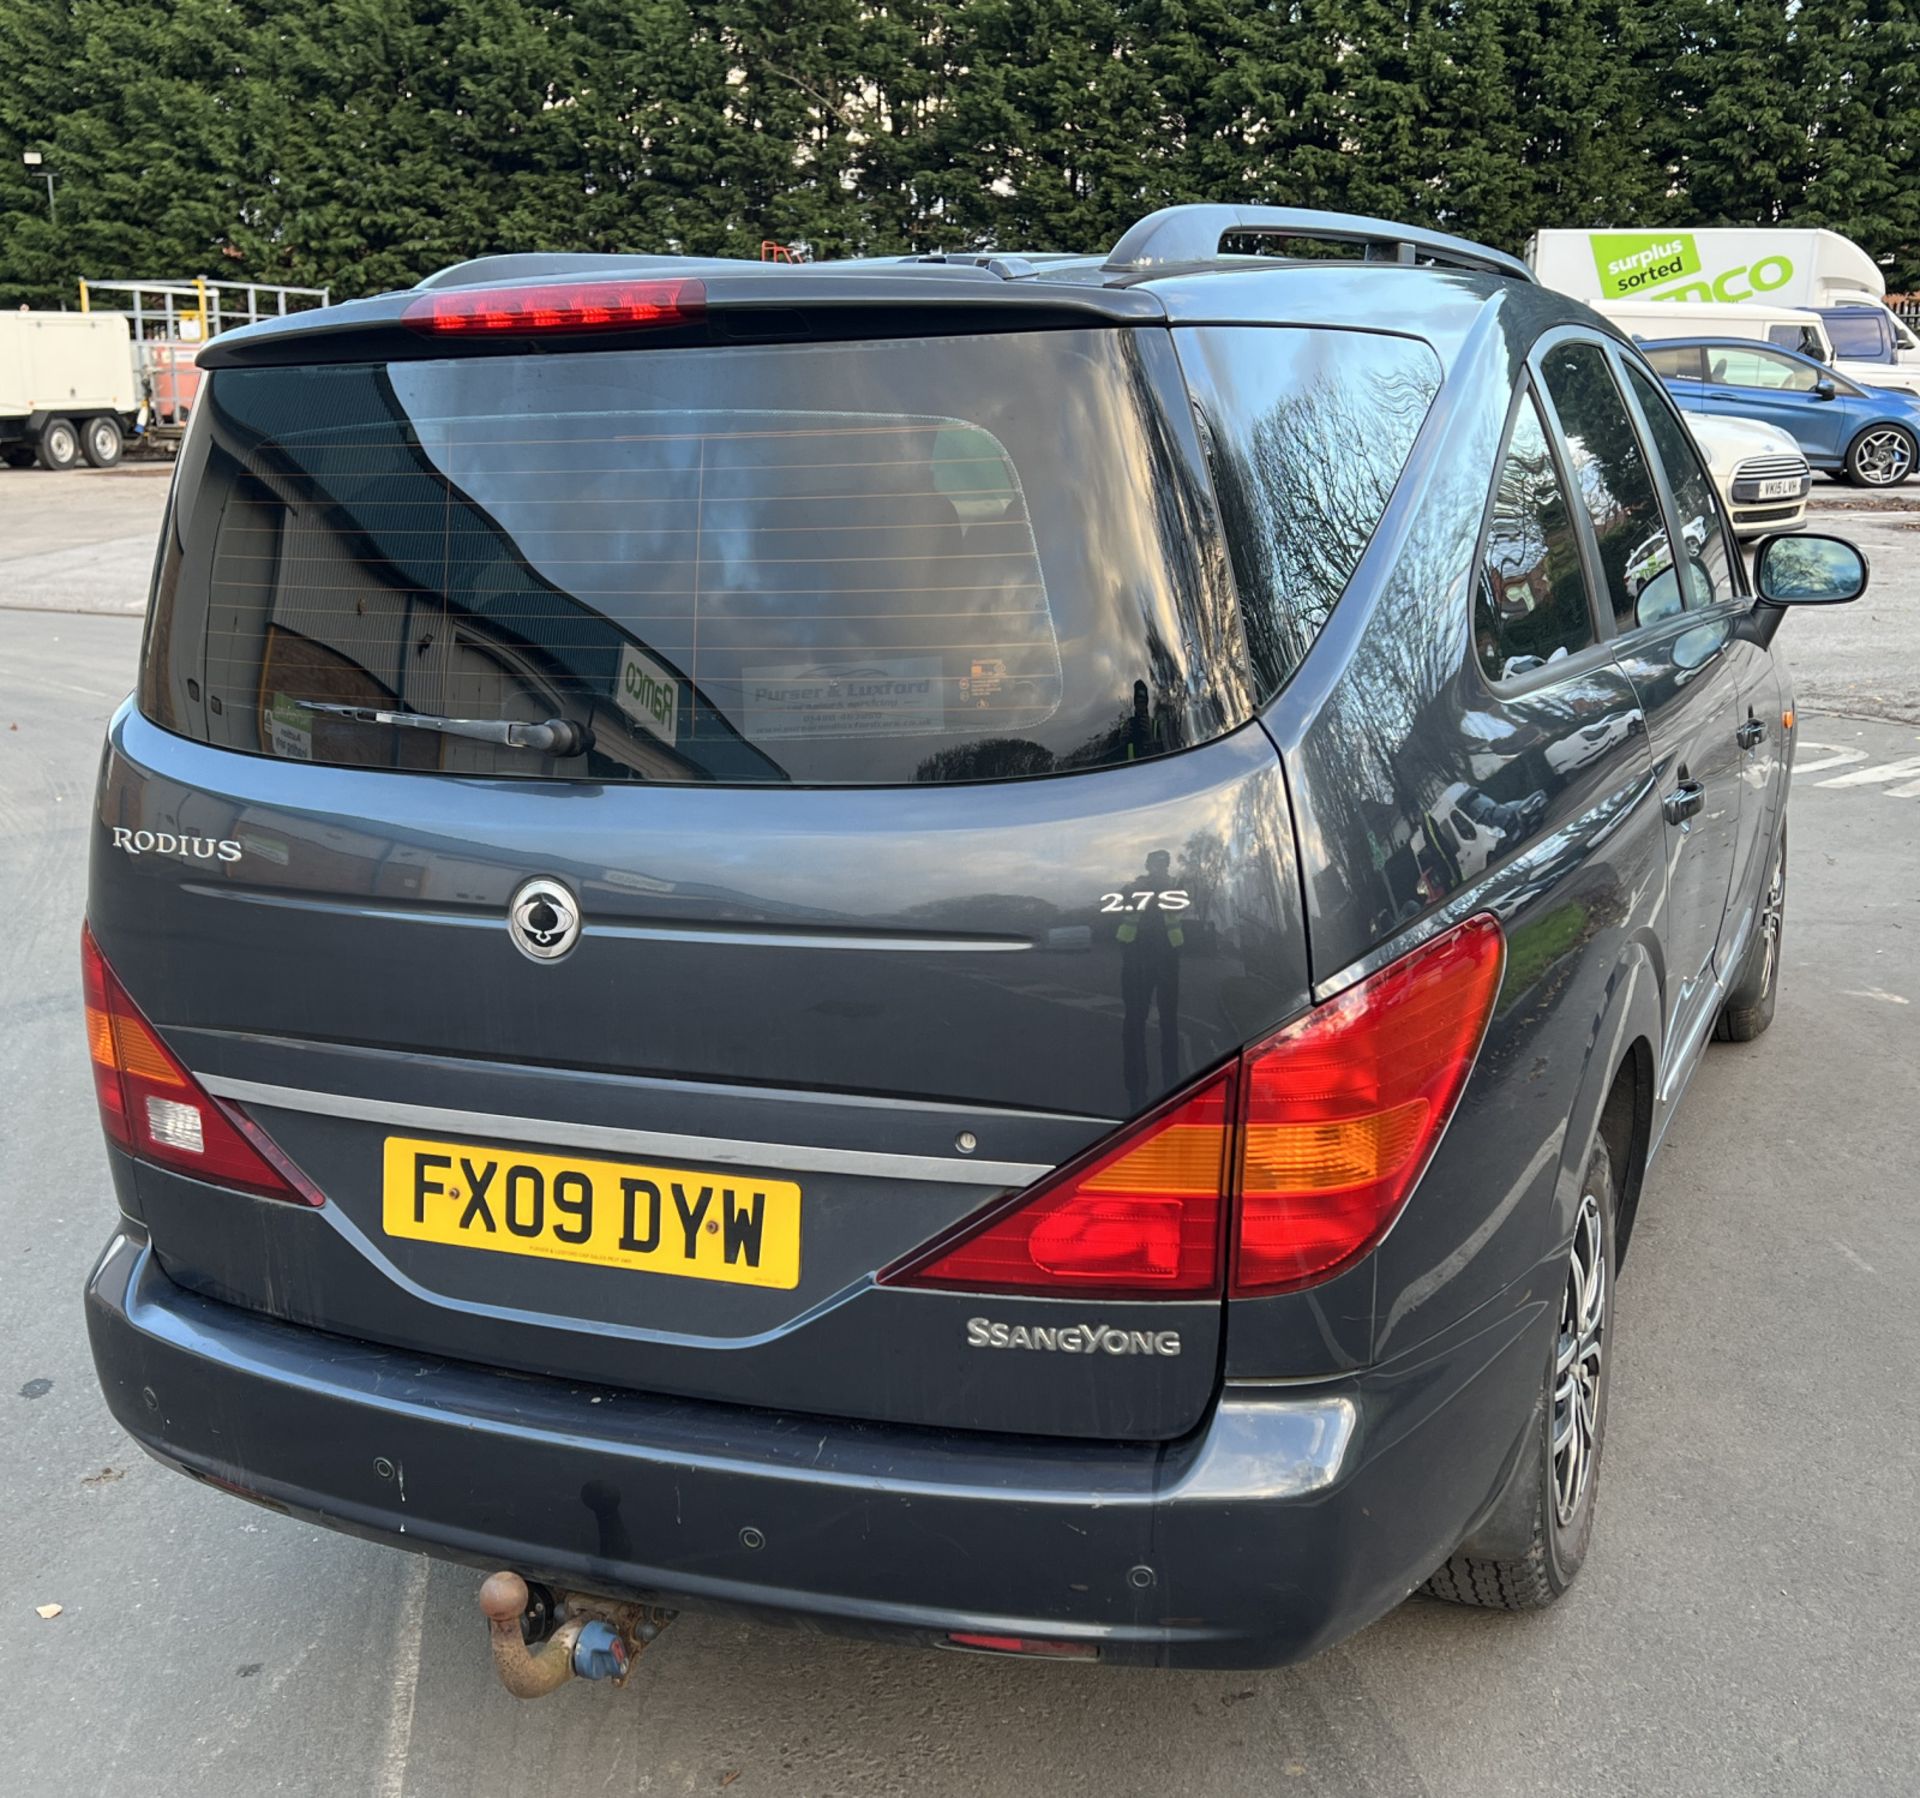 Ssangyong Rodius - 7 seater - 2.7L Mercedes engine - Please see description - Image 5 of 33